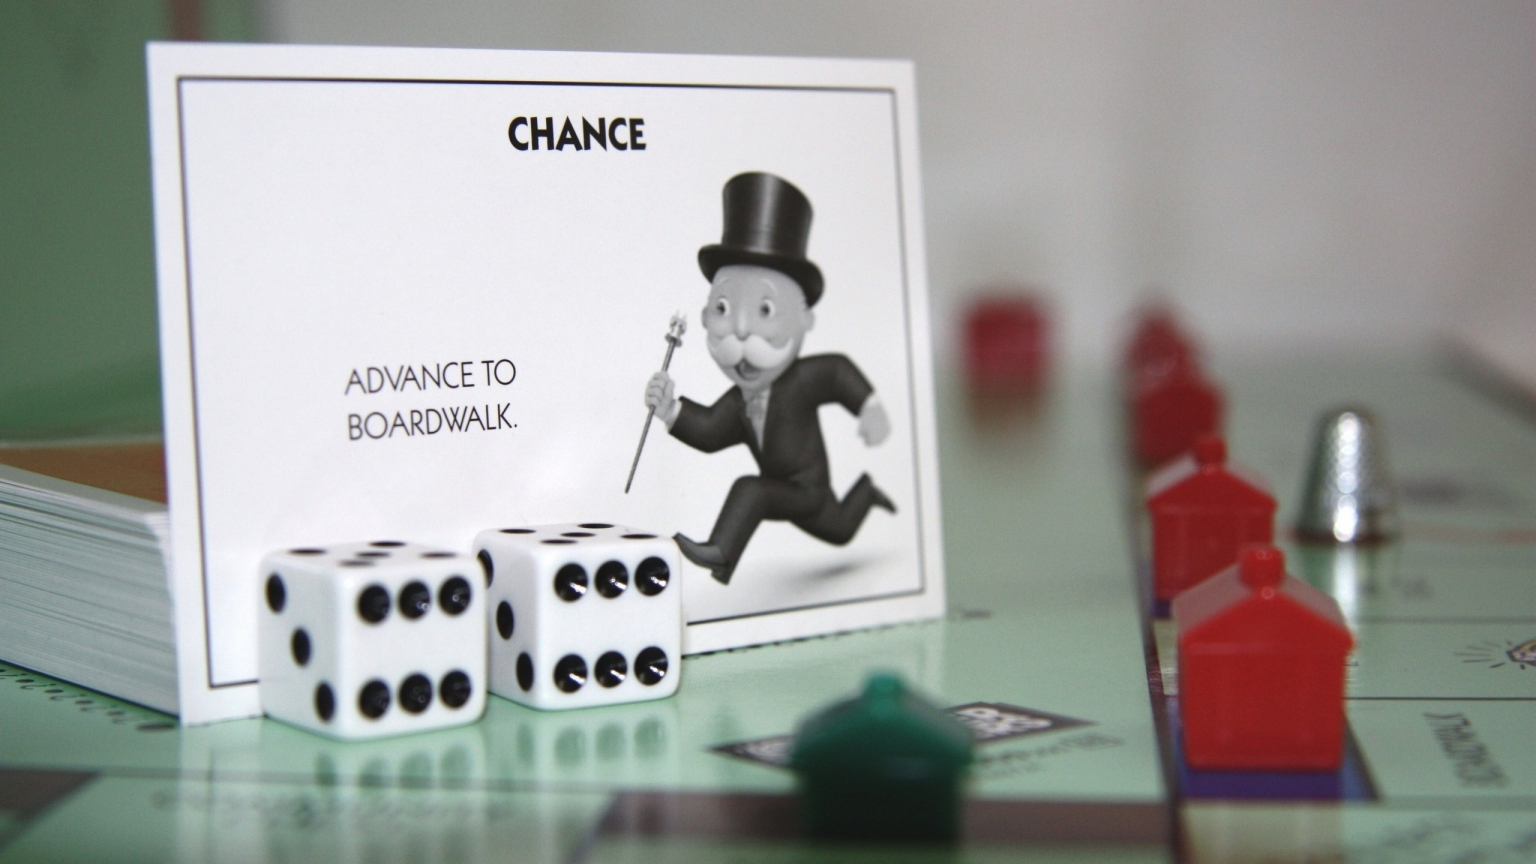 Monopoly for 1536 x 864 HDTV resolution